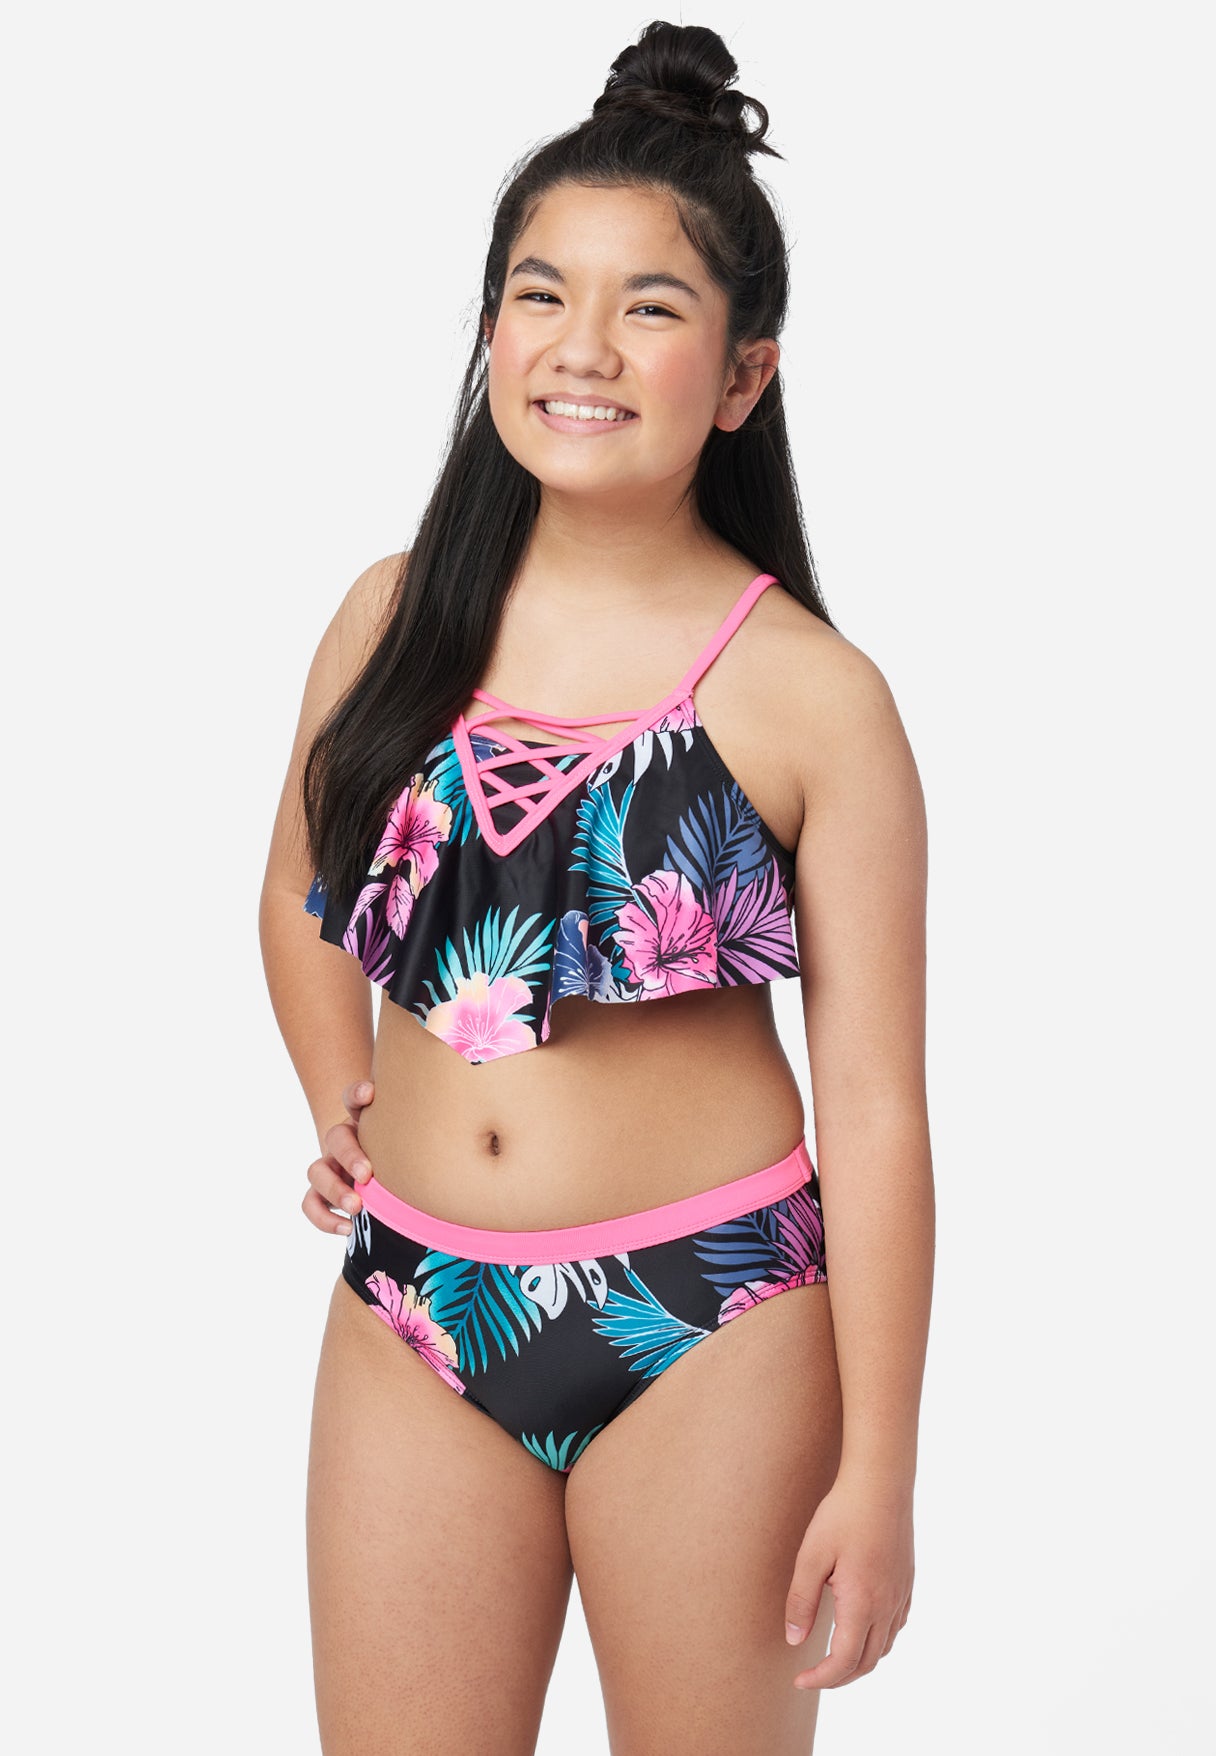 Justice - Make a splash with 30% off swimsuits (today, online only)!